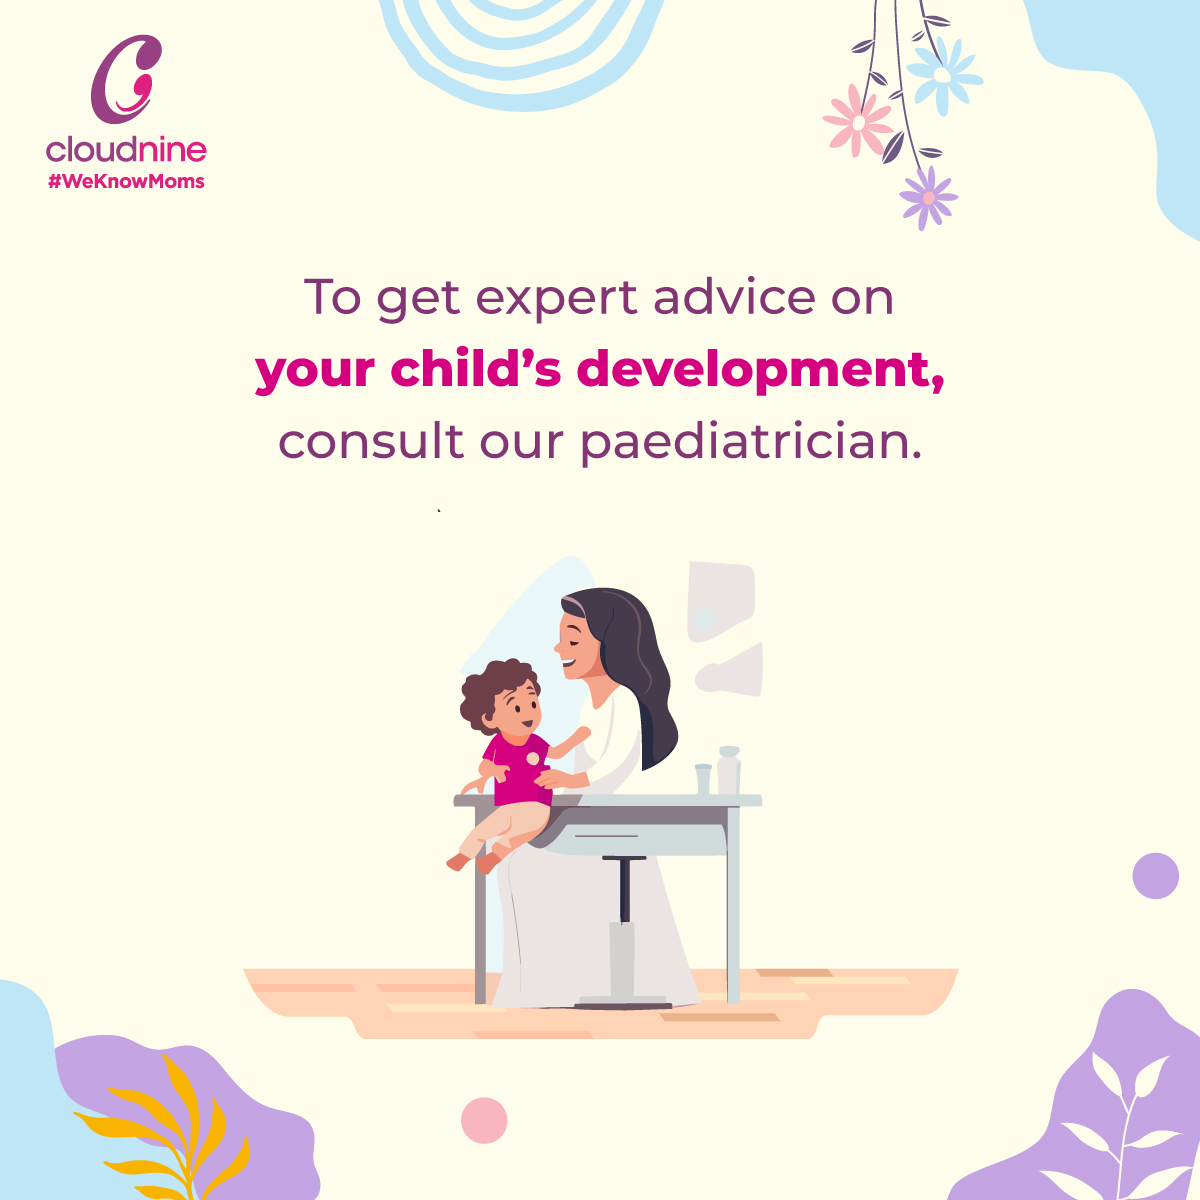 👶Babyproofing is essential for your child's safety and well-being. It enables independent learning and exploration, encourages cognitive development, and reduces stress for parents.👨‍👩‍👧
#WeKnowMoms #oncloudnine #babyproofing #parentingtips #babysafety #safetyfirst #babydevelopment